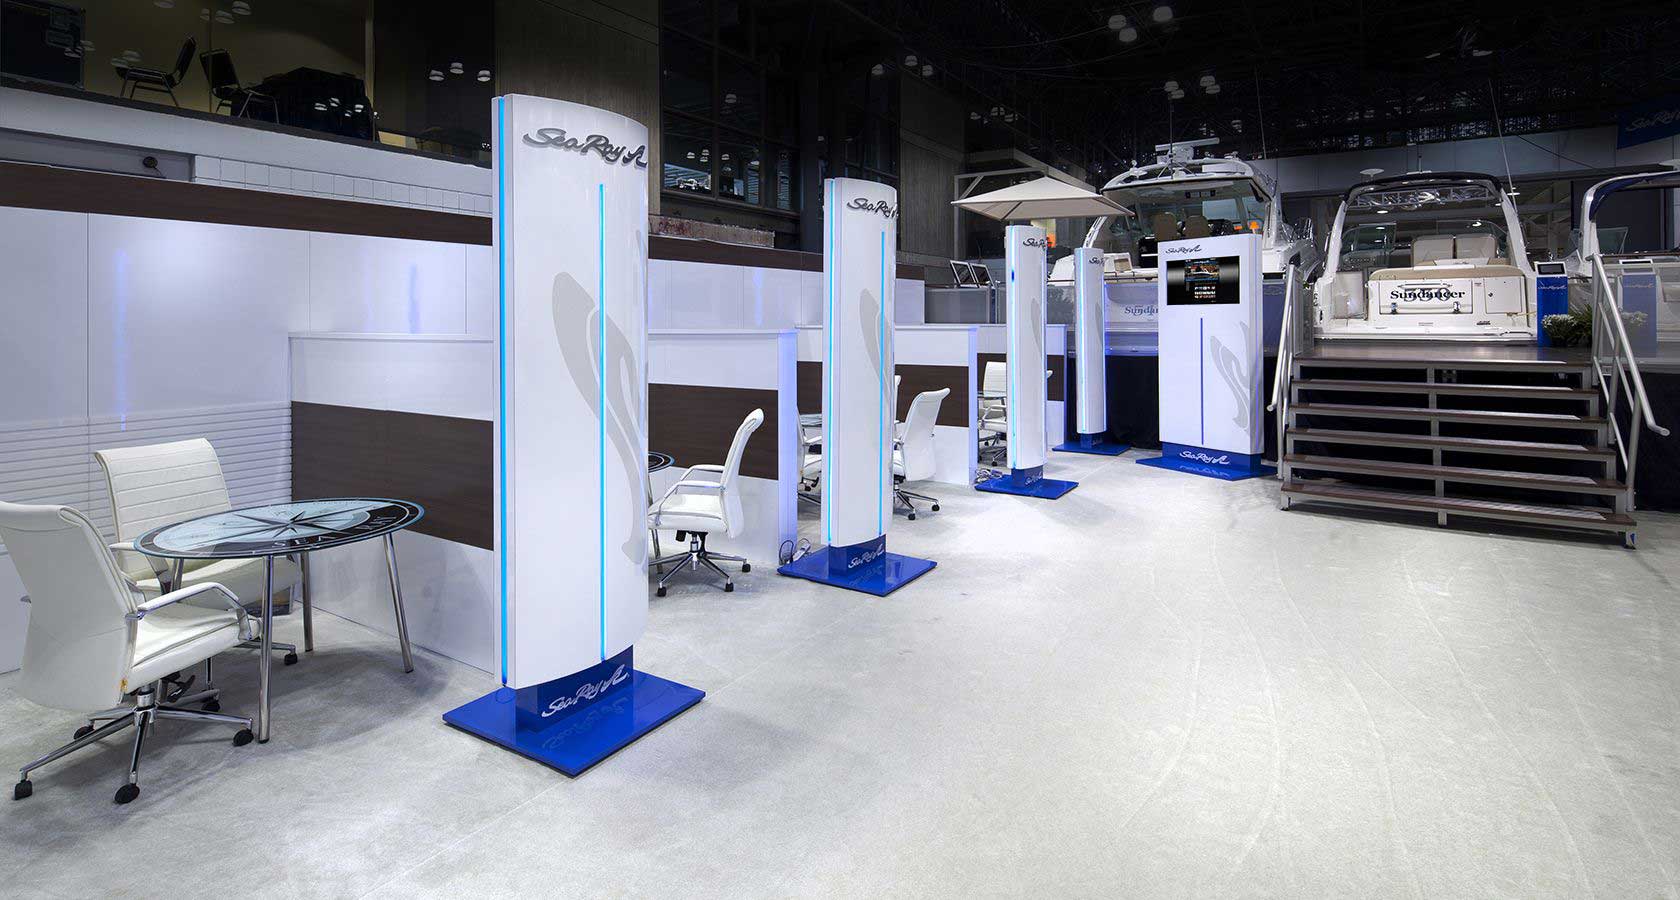 sea ray boats exhibit offices